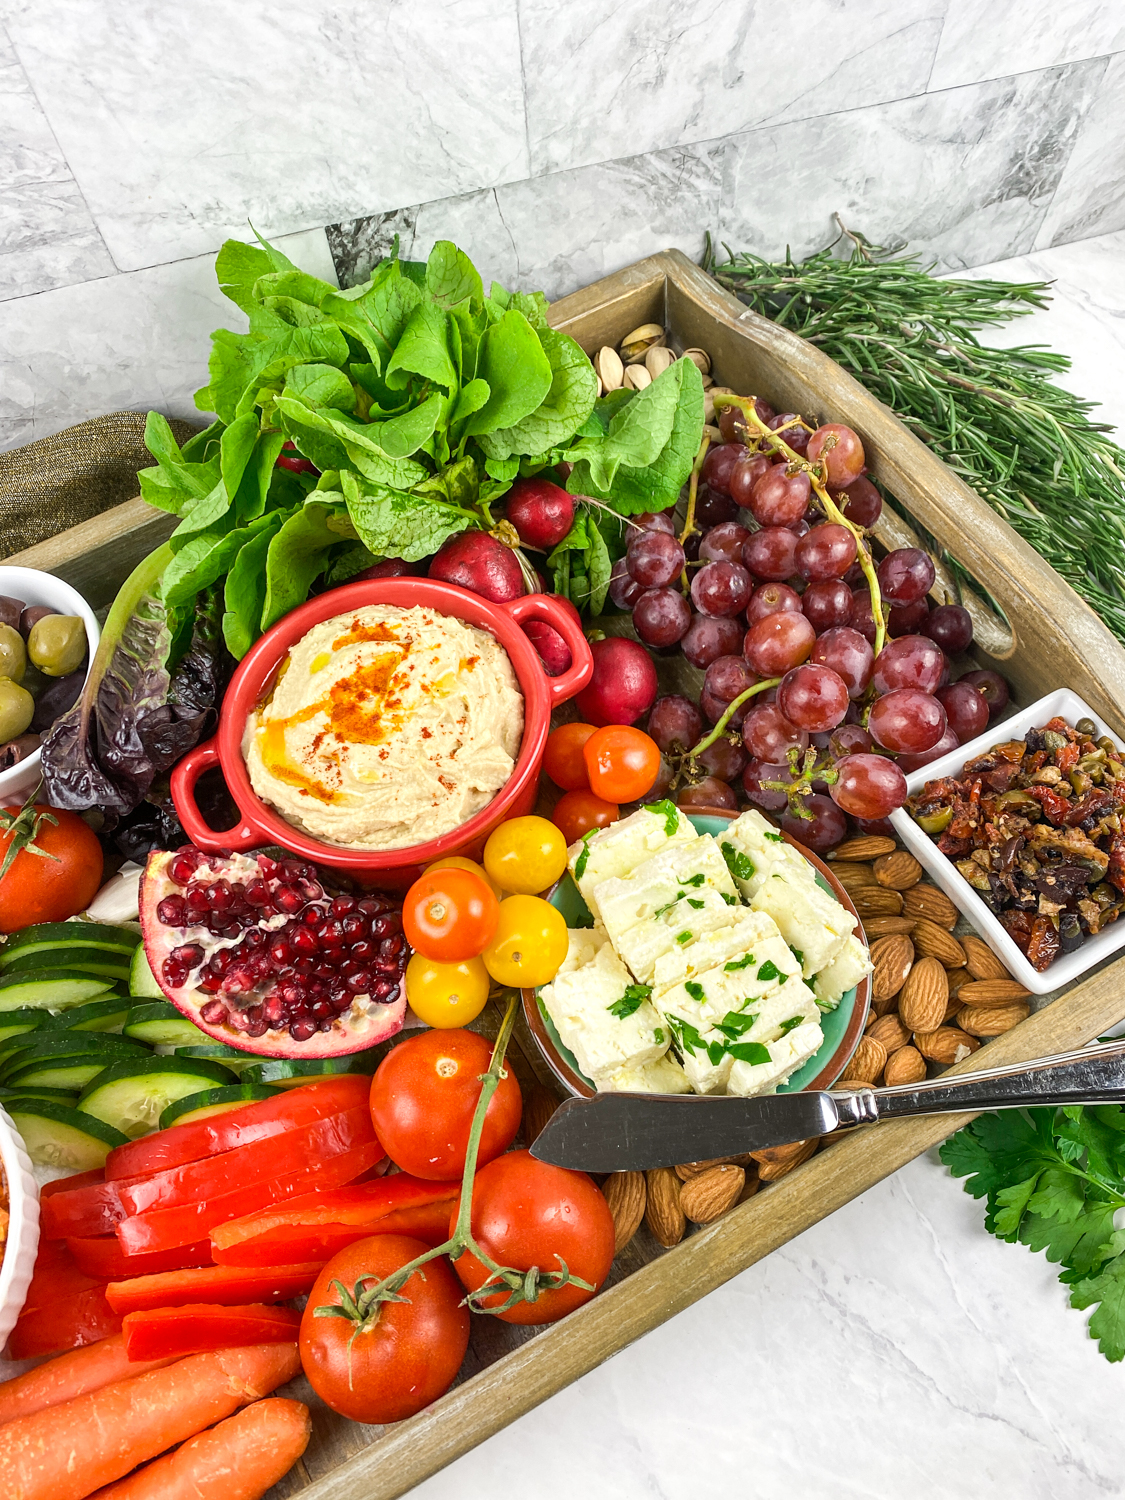 This easy to make Mediterranean mezze platter is the perfect party appetizer or a light meal for friends and family.